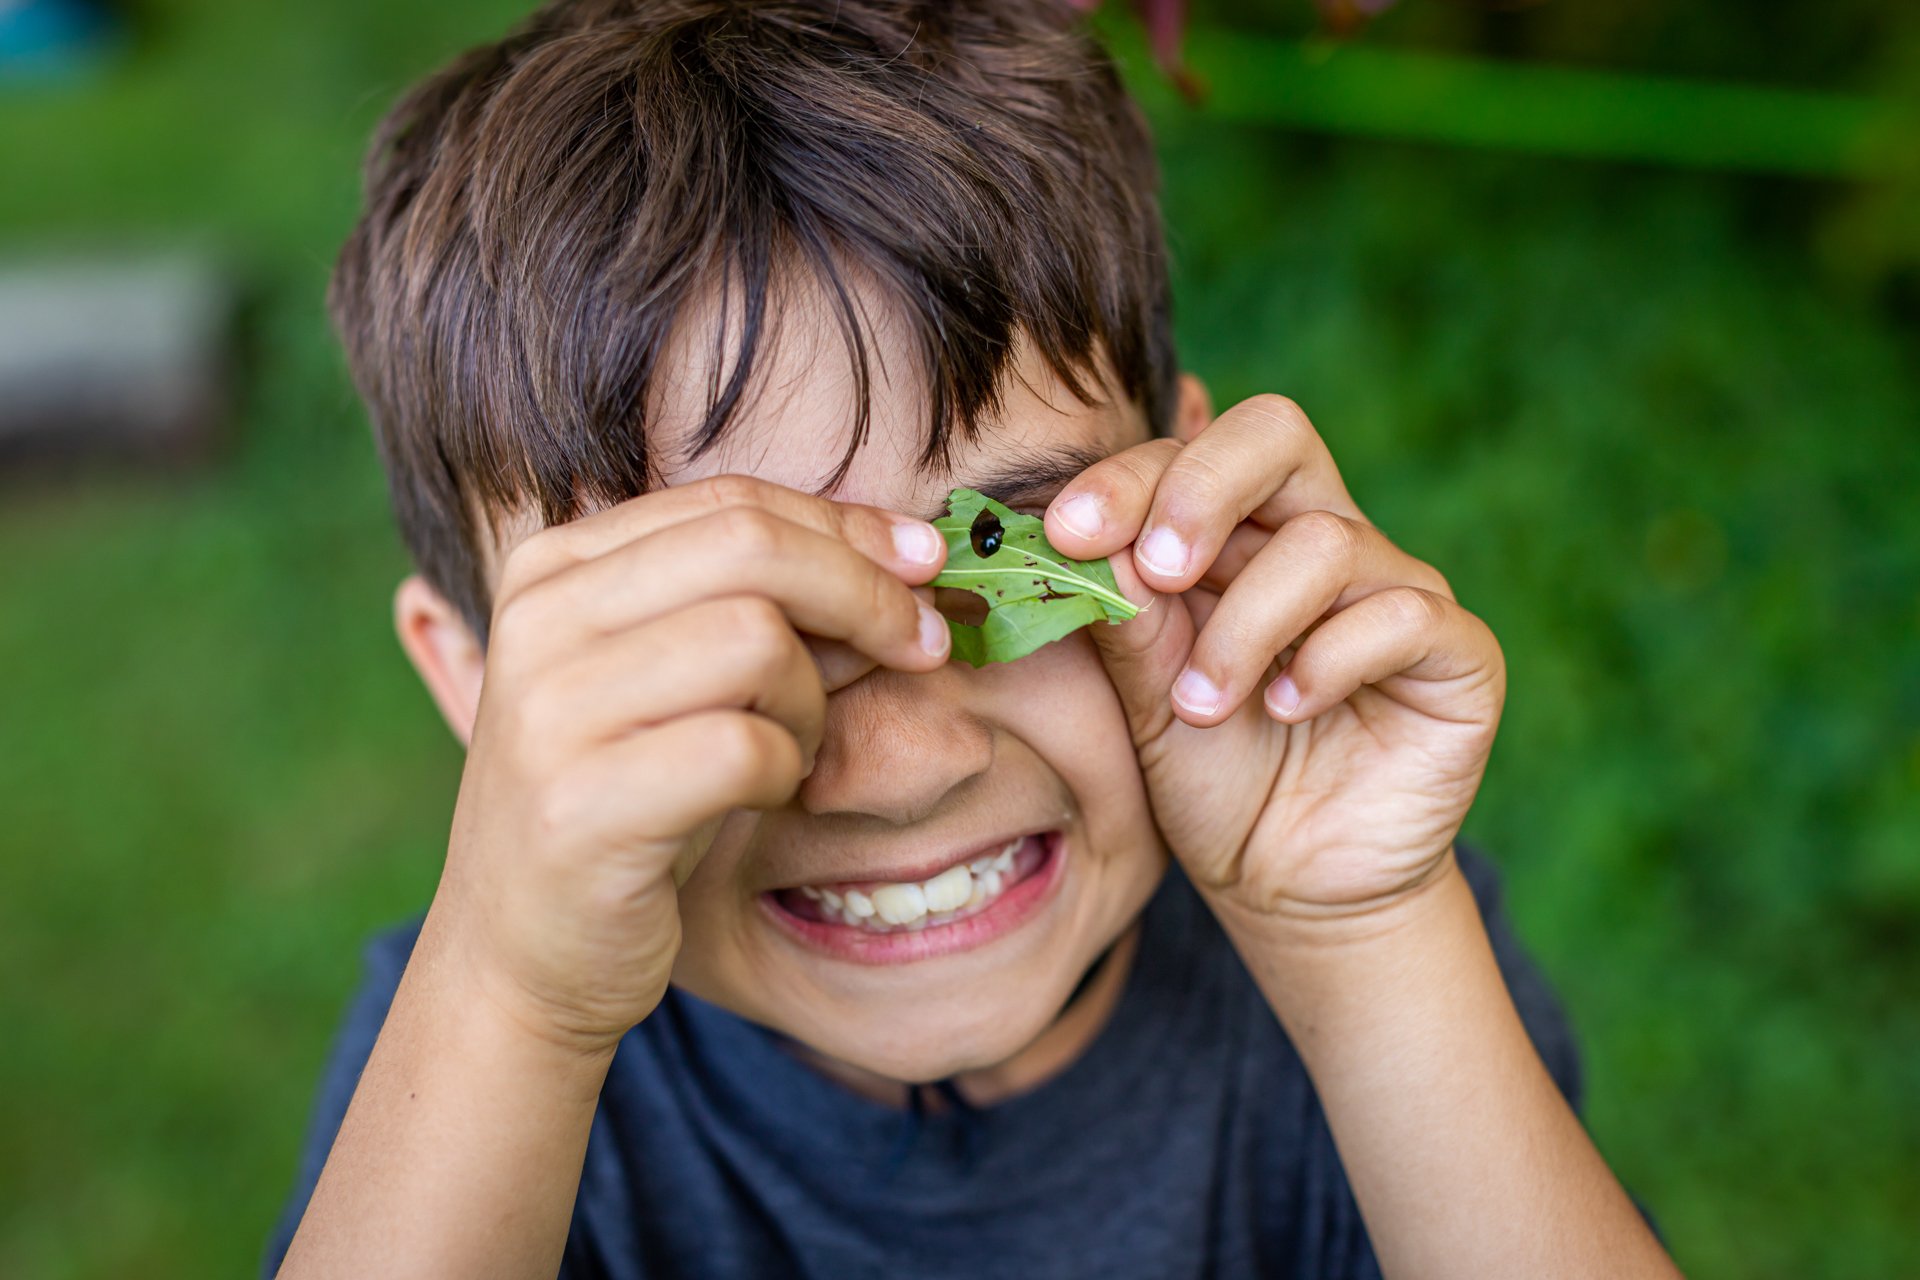 A smiling camper at Arcadia Nature Camp holds a leave up to his eye and peers through the holes made by a hungry insect